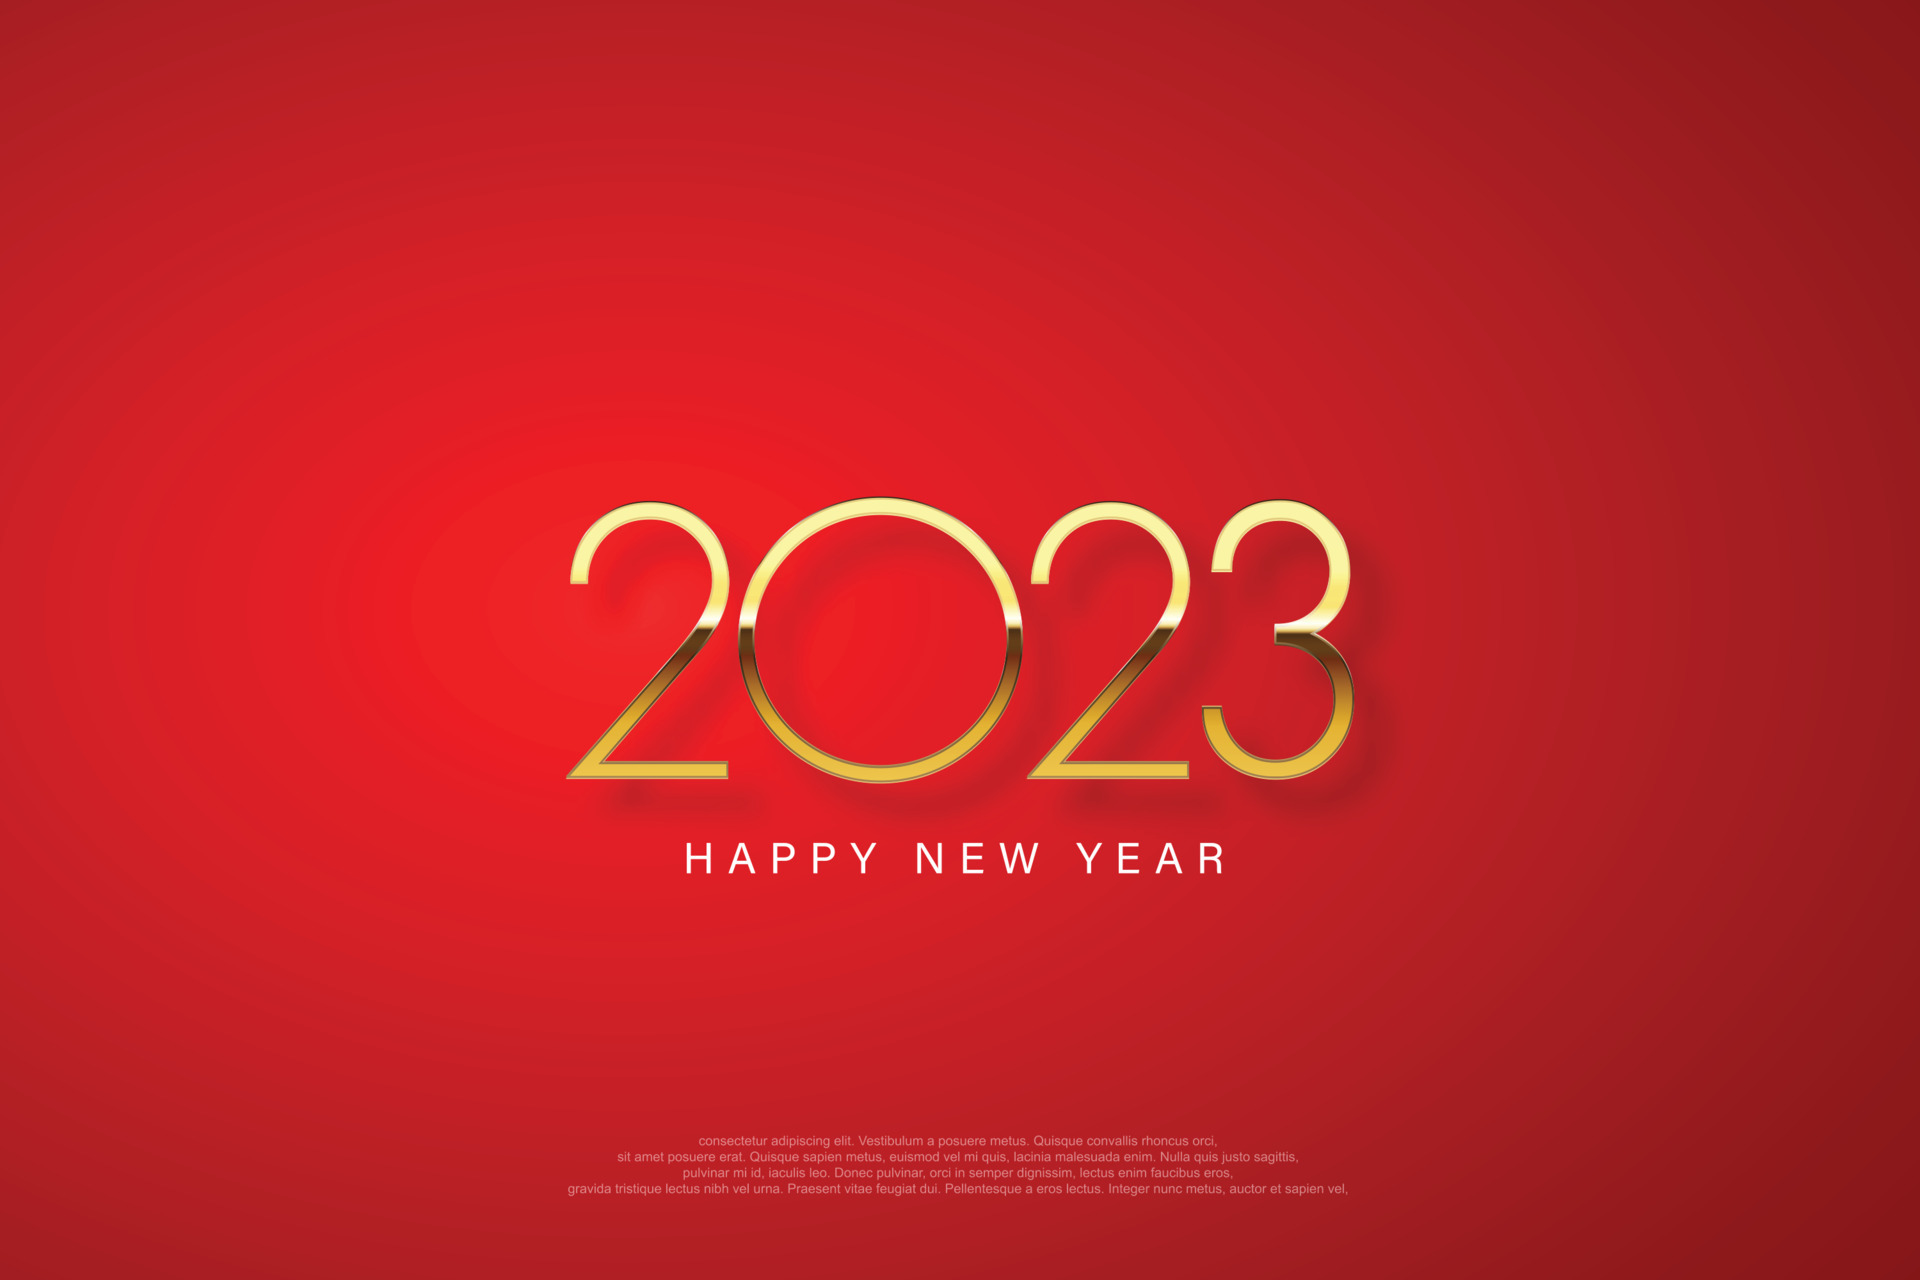 2023 Happy New Year Elegant Design Vector Illustration Of Golden 2023 Logo Numbers On Red Background Perfect Typography For 2023 Save The Date Luxury Designs And New Year Celebration 6950865 Vector Art At Vecteezy